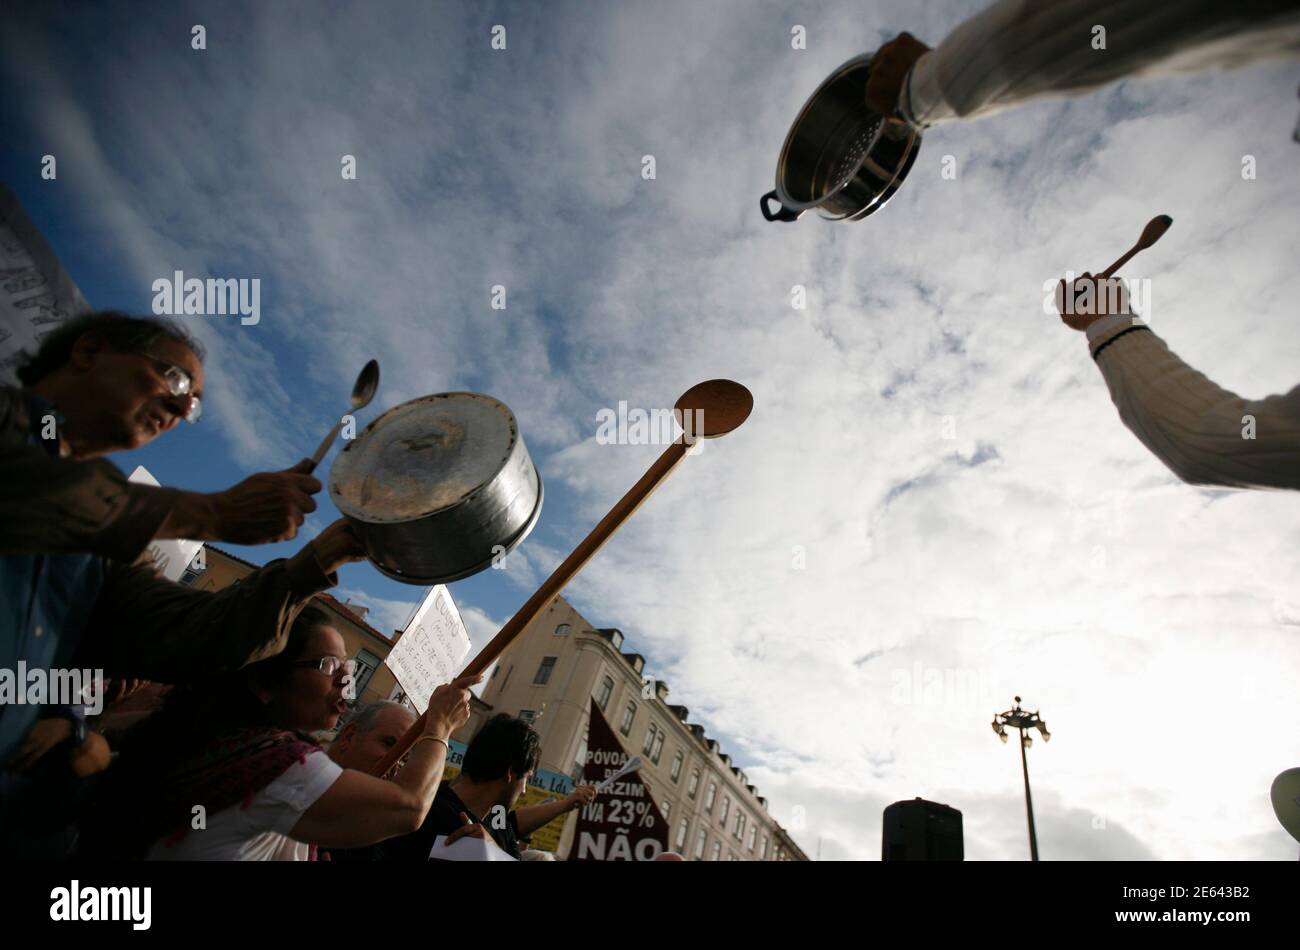 Restaurant workers banging on saucepans with spoons shout slogans in front of parliament in Lisbon October 16, 2012. According to the protesters, they are demanding for the reduction of value added tax (VAT) from 23 to 6 percent in the catering sector. REUTERS/Rafael Marchante (PORTUGAL - Tags: BUSINESS POLITICS CIVIL UNREST) Stock Photo